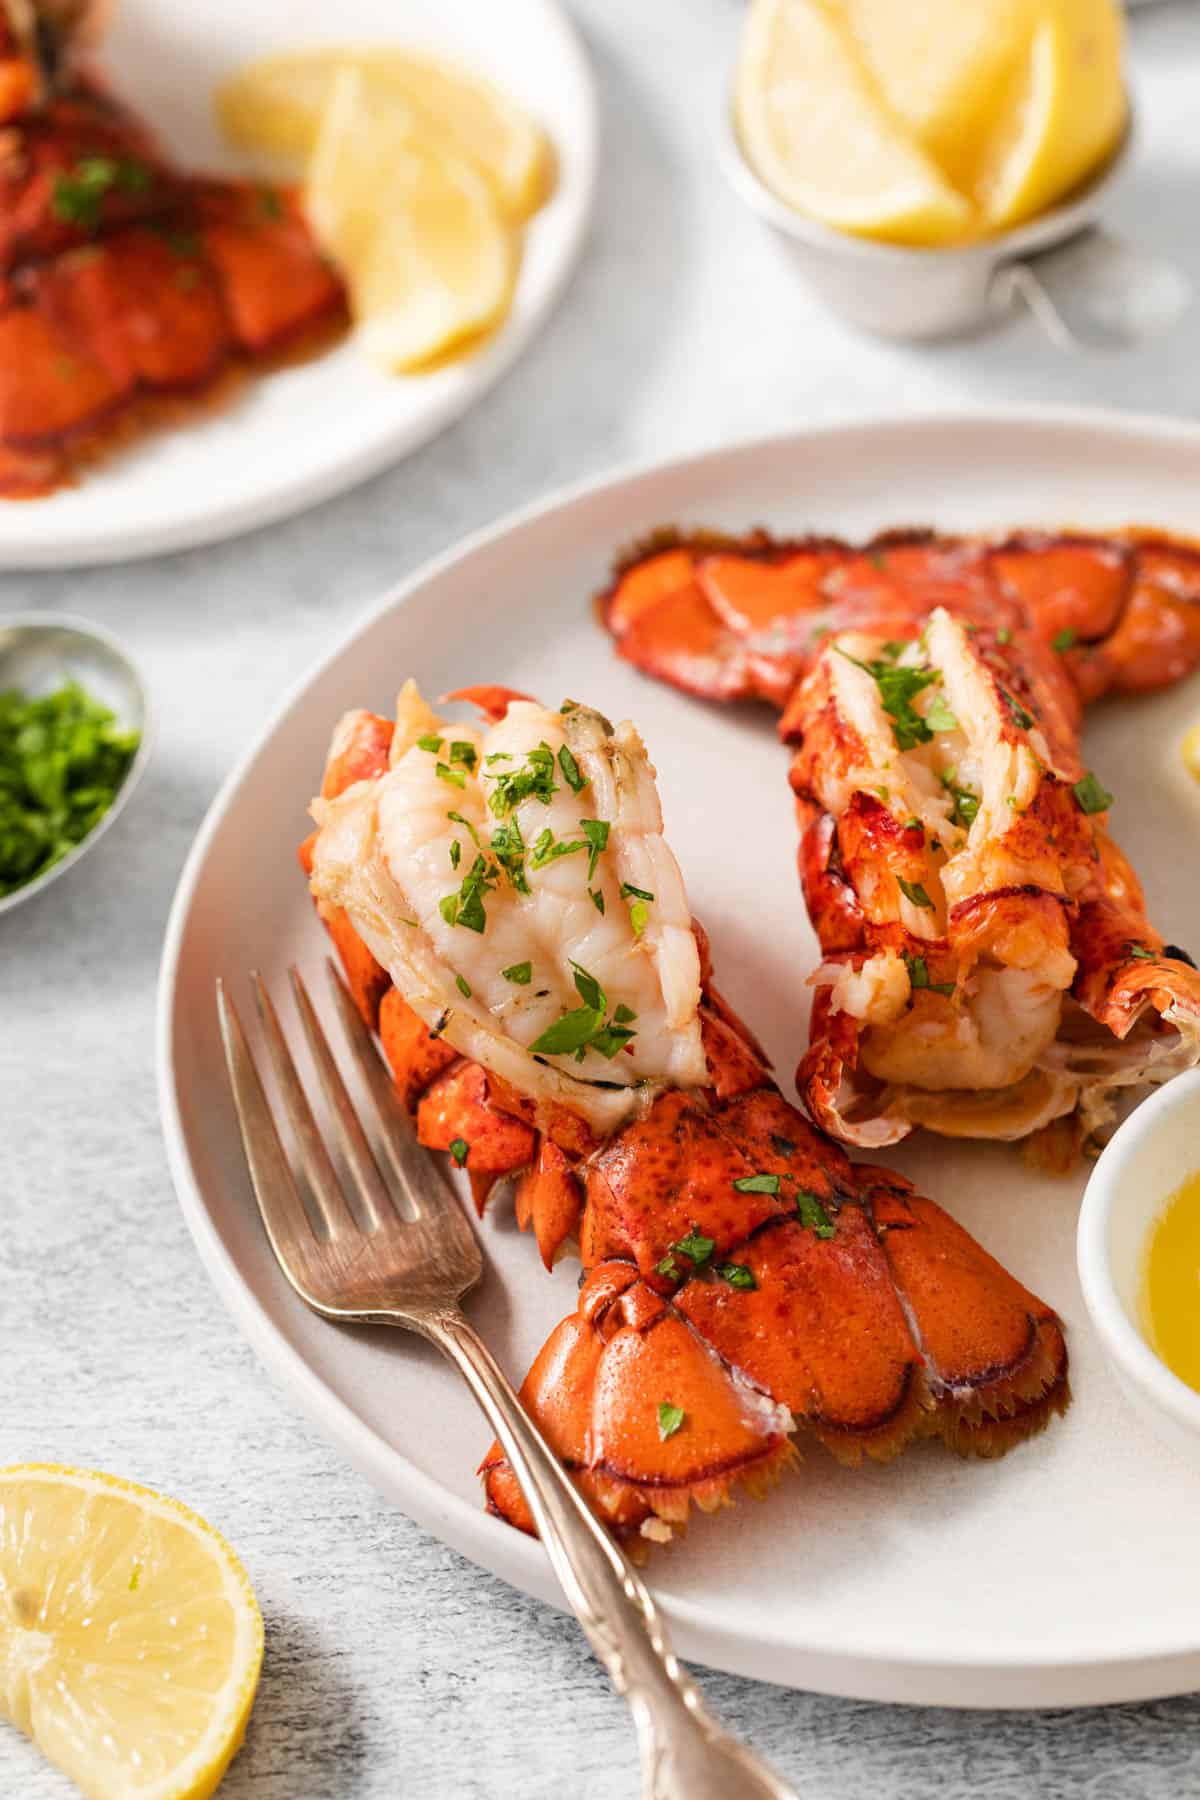 Two lobster tails on a plate with a fork.